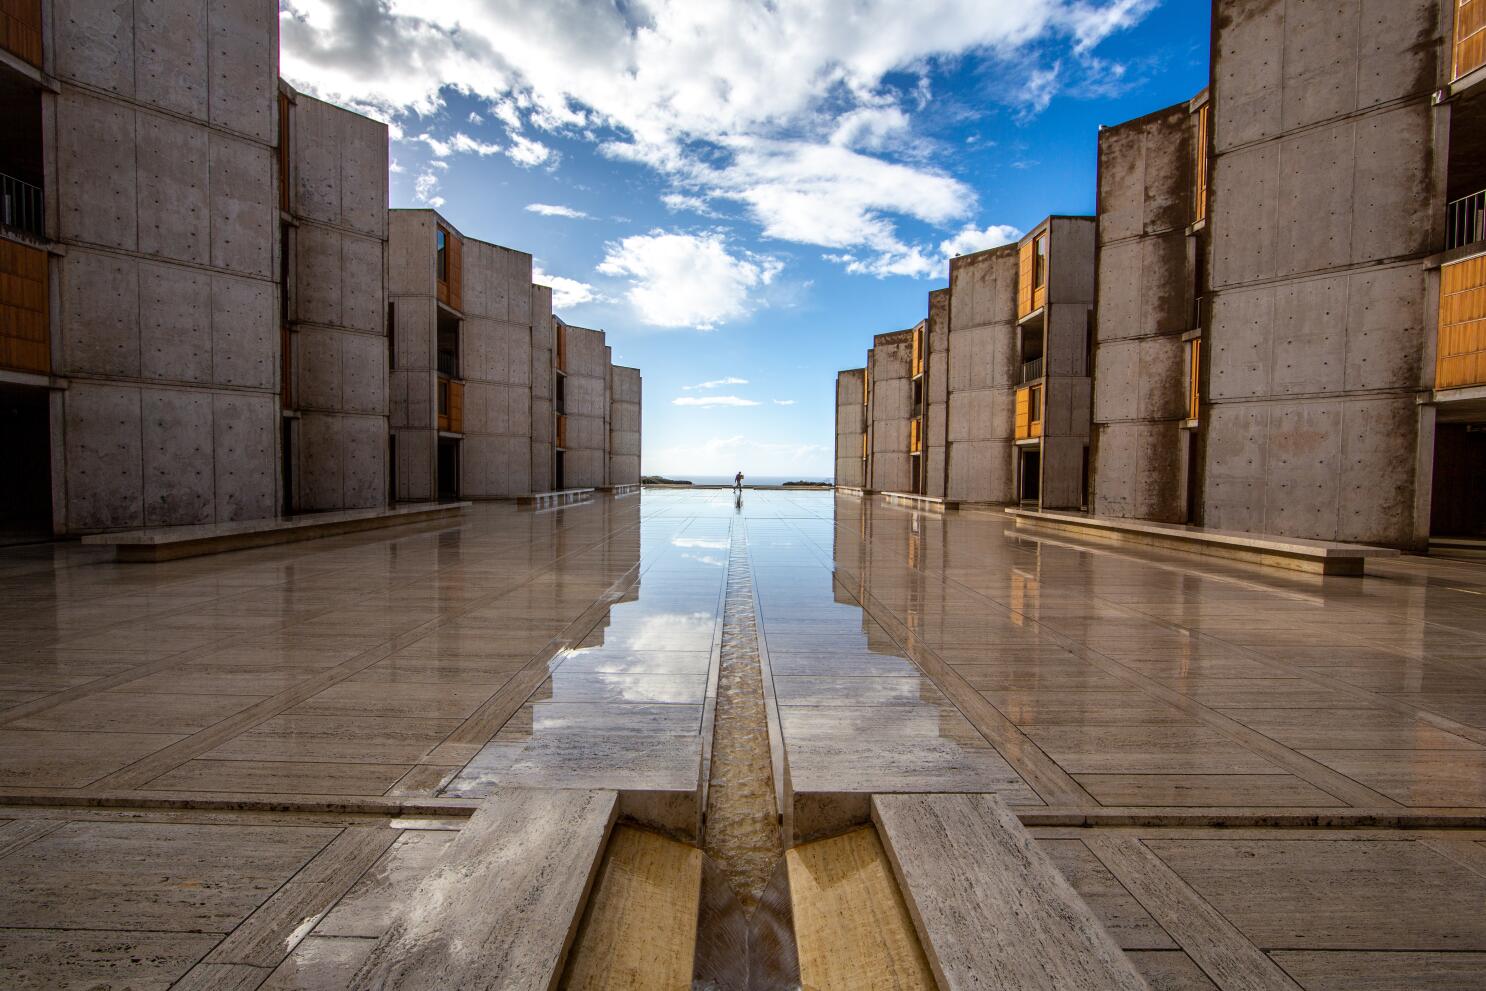 Donate Now  Harnessing Plants Initiative by Salk Institute